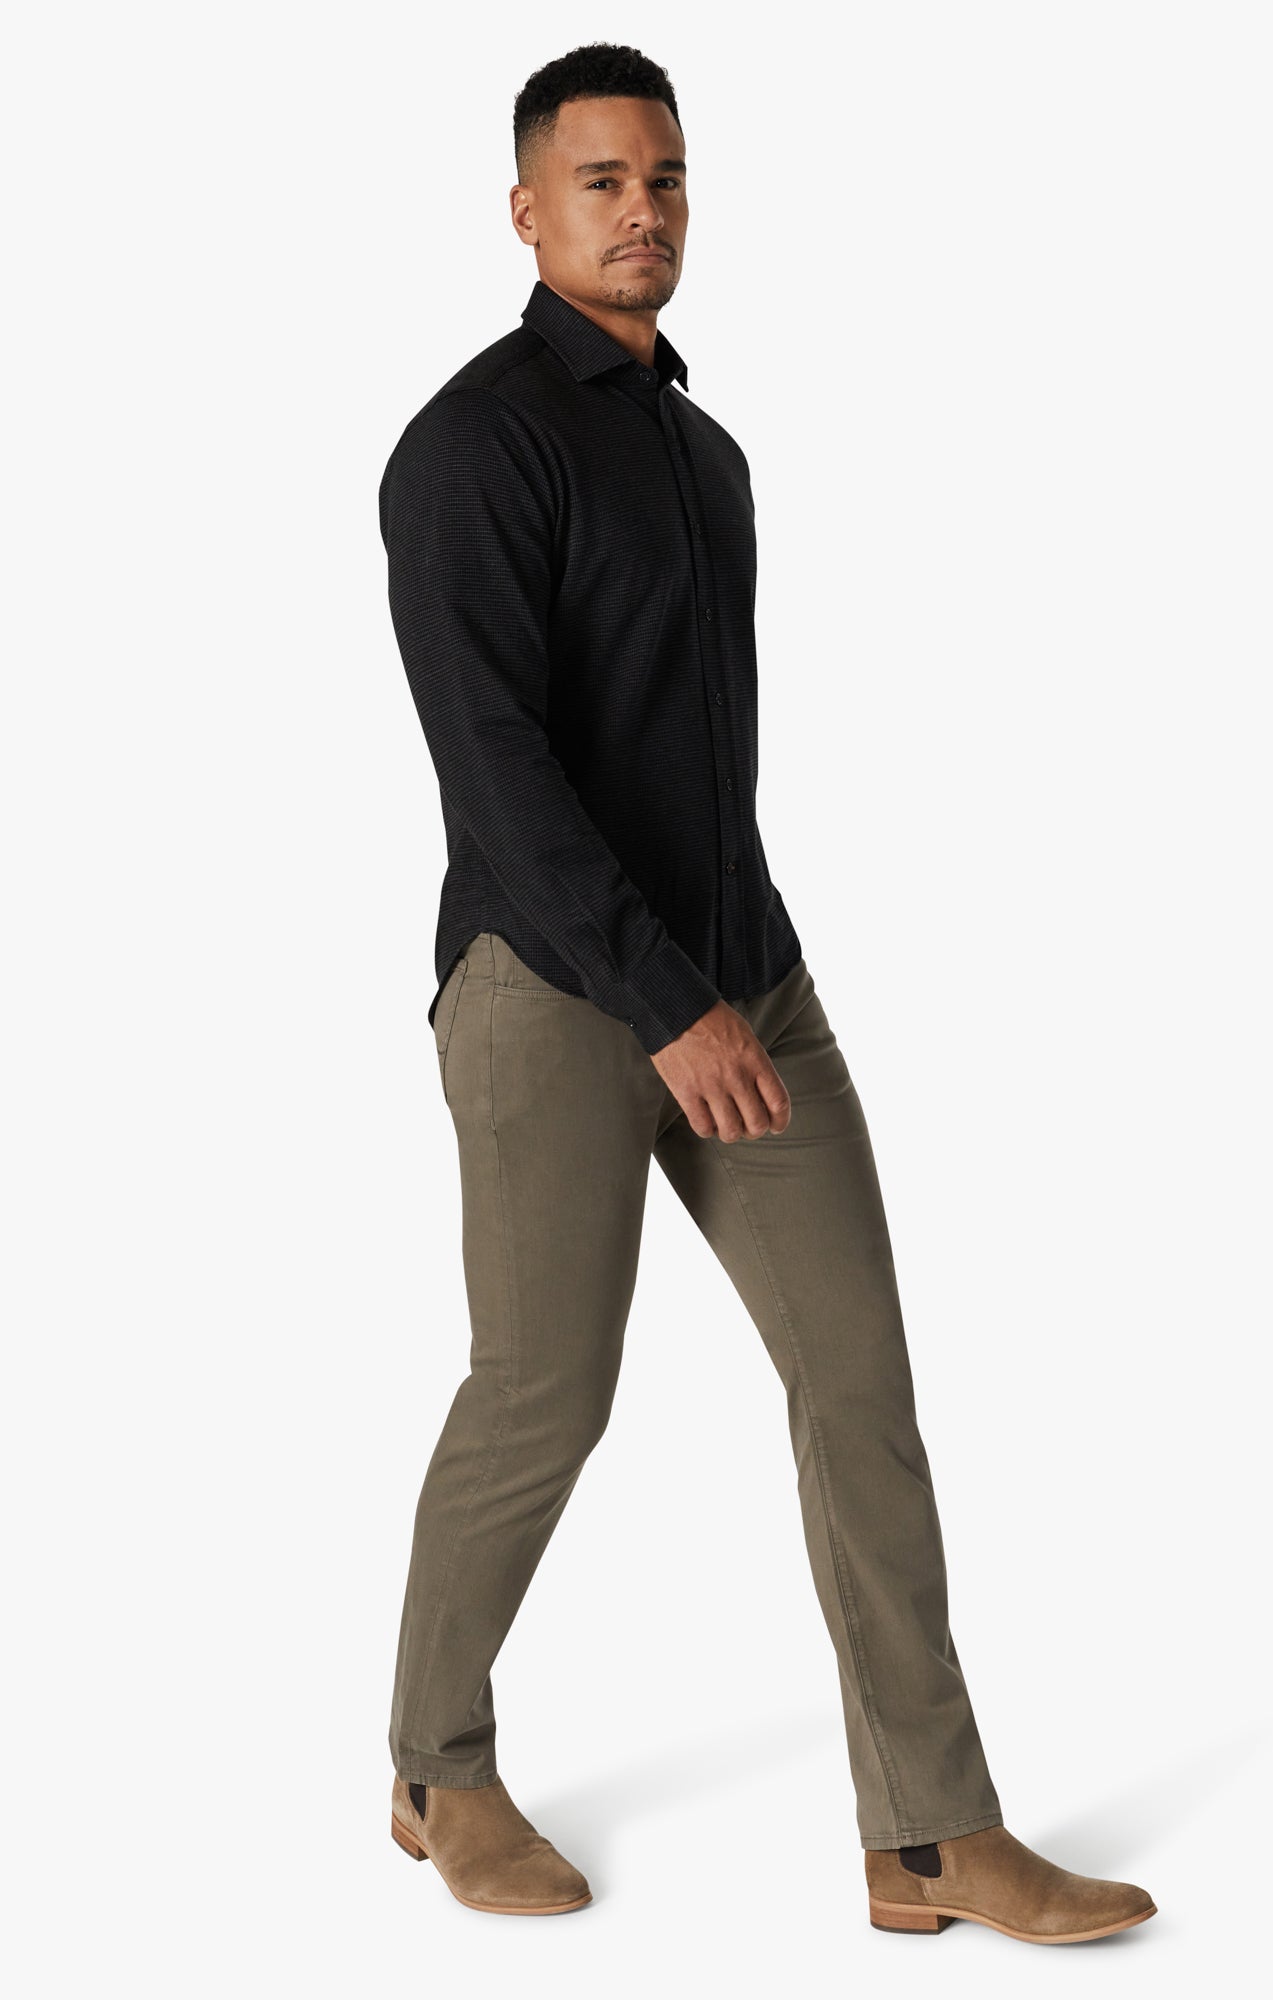 Courage Straight Leg Pants in Canteen Twill Image 6